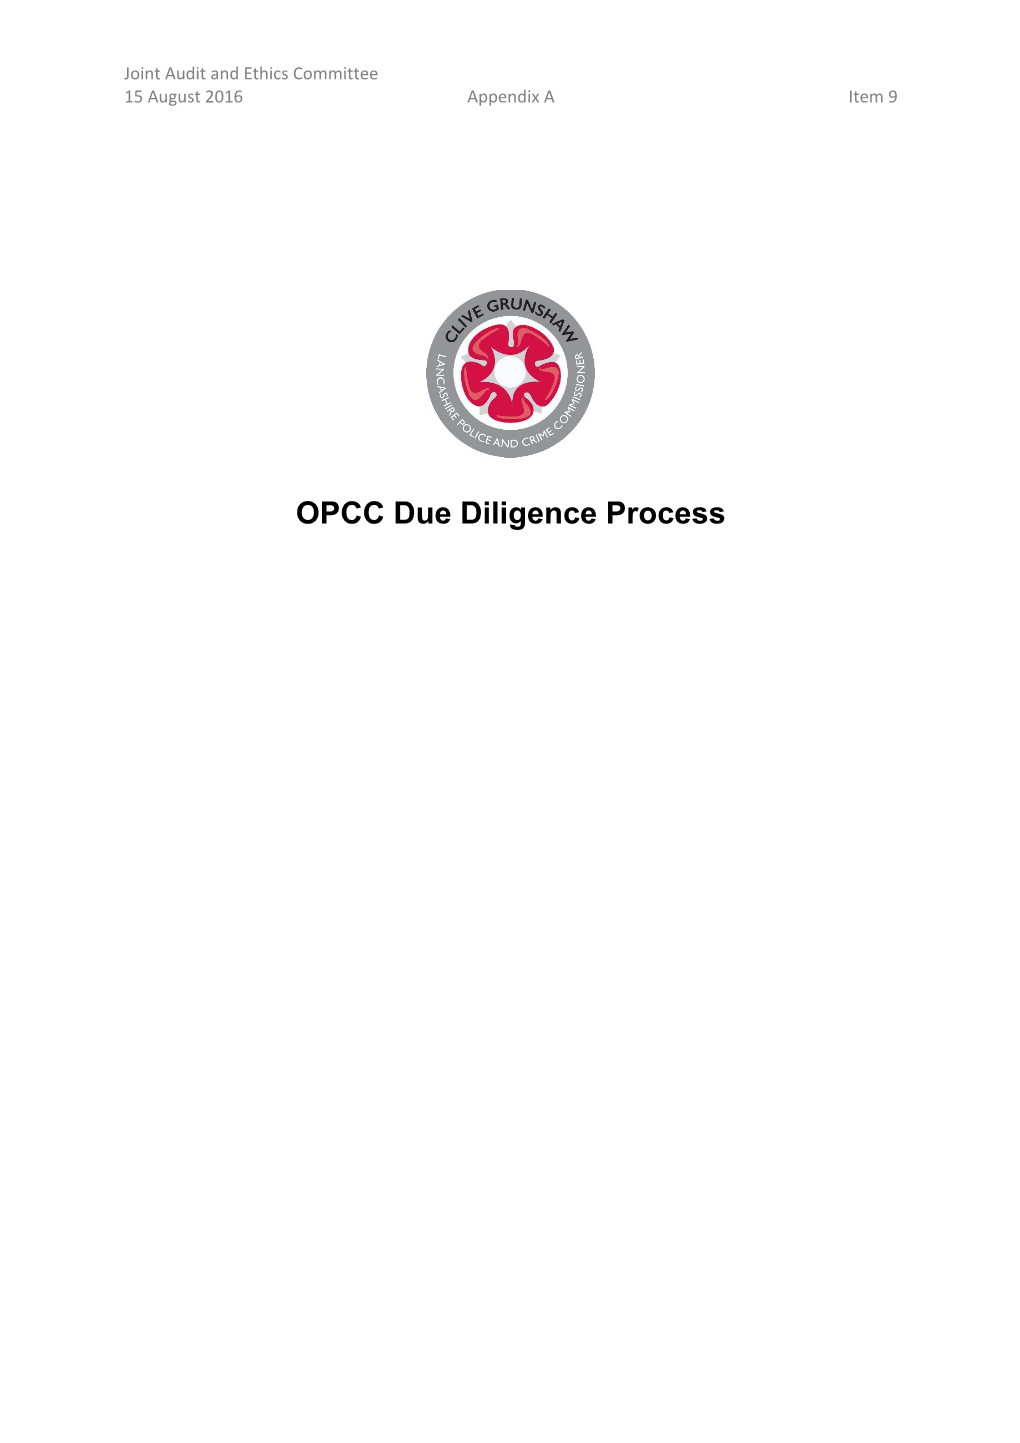 OPCC Due Diligence Process